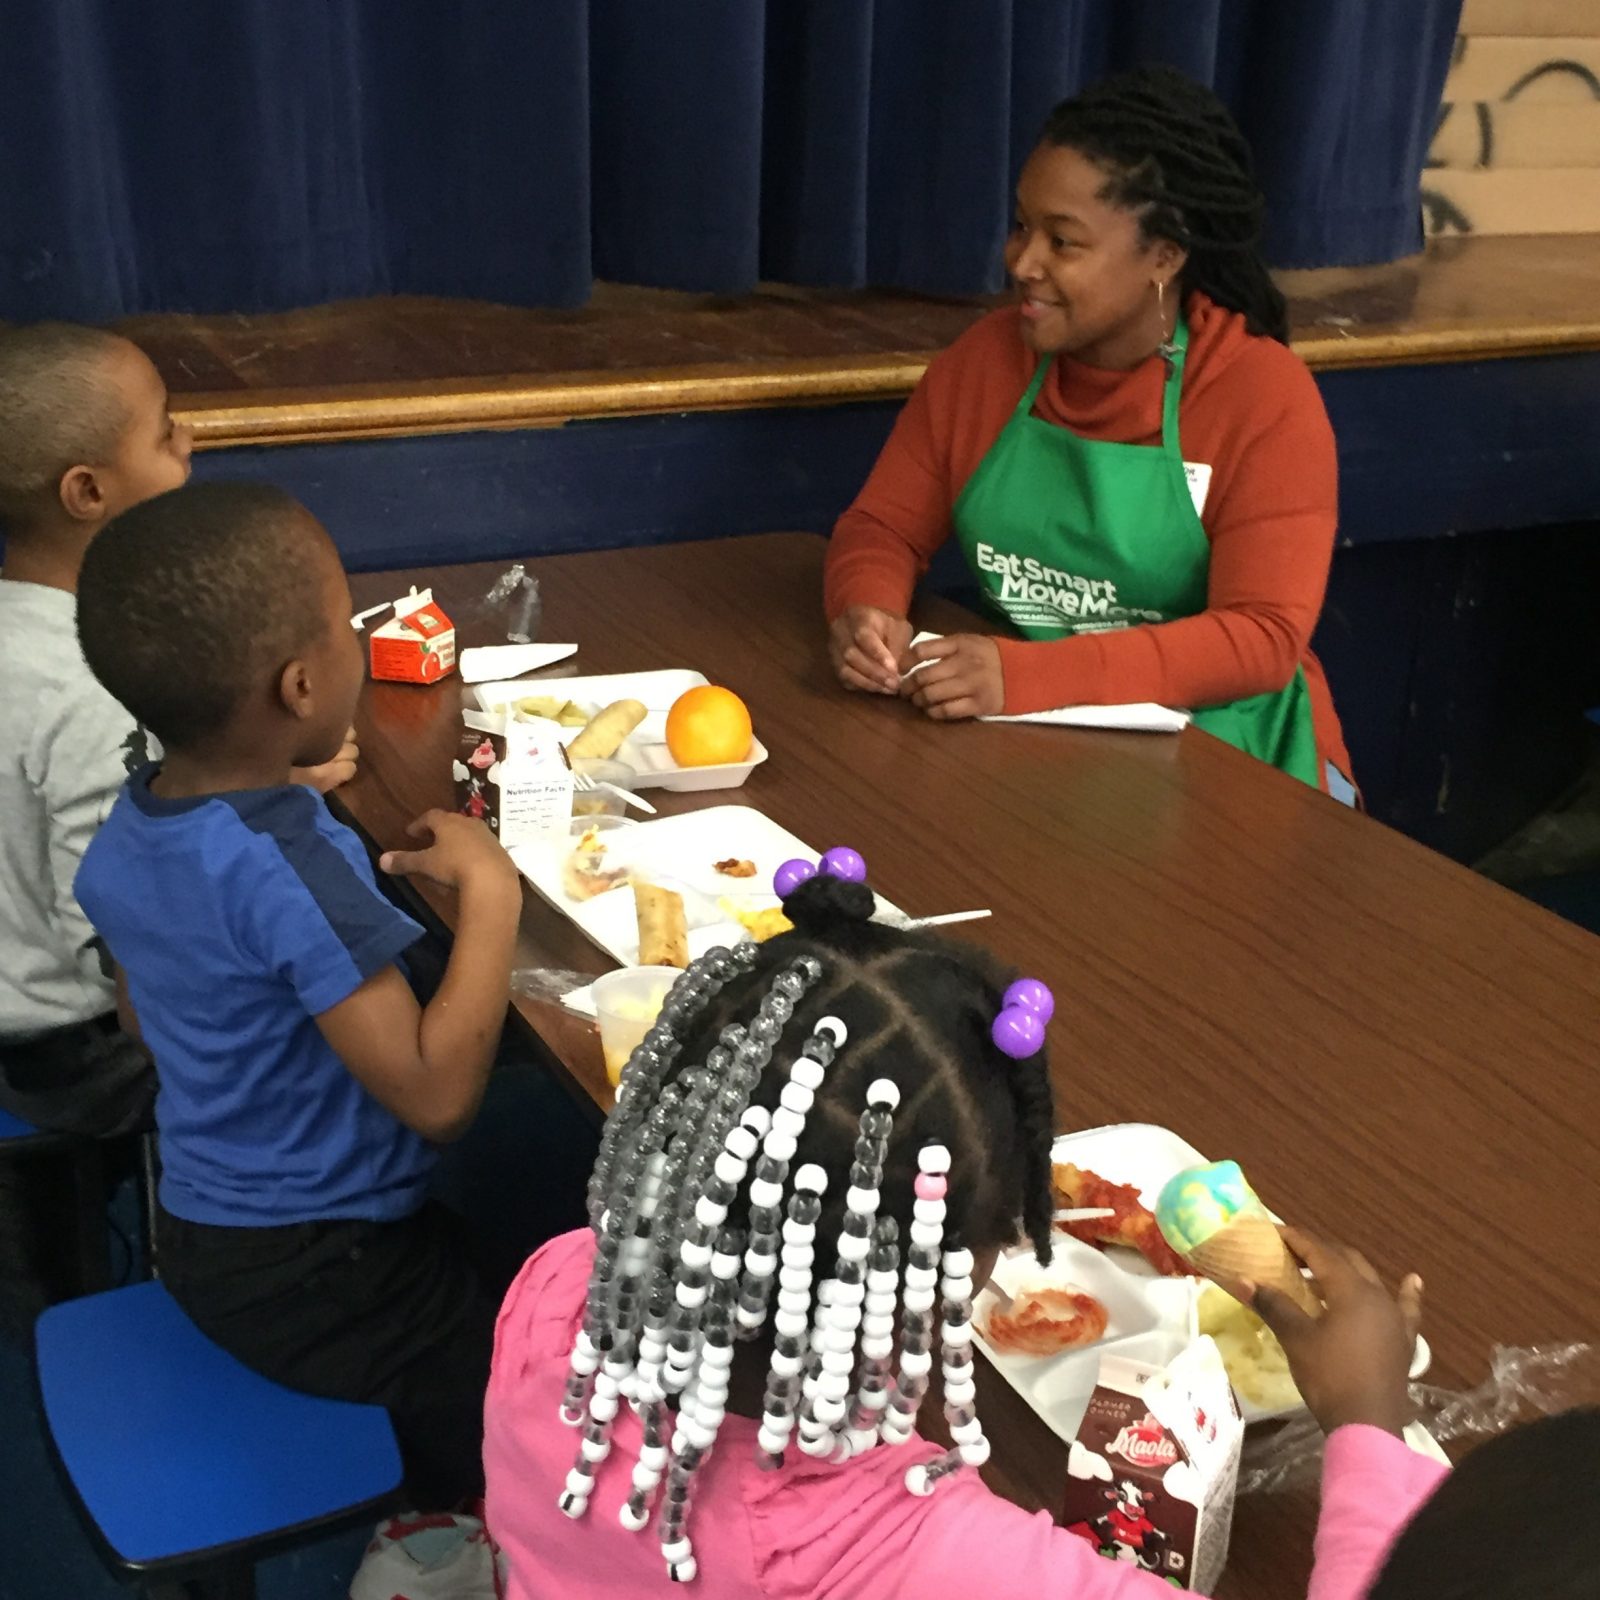 An adult woman talks to three children while they eat